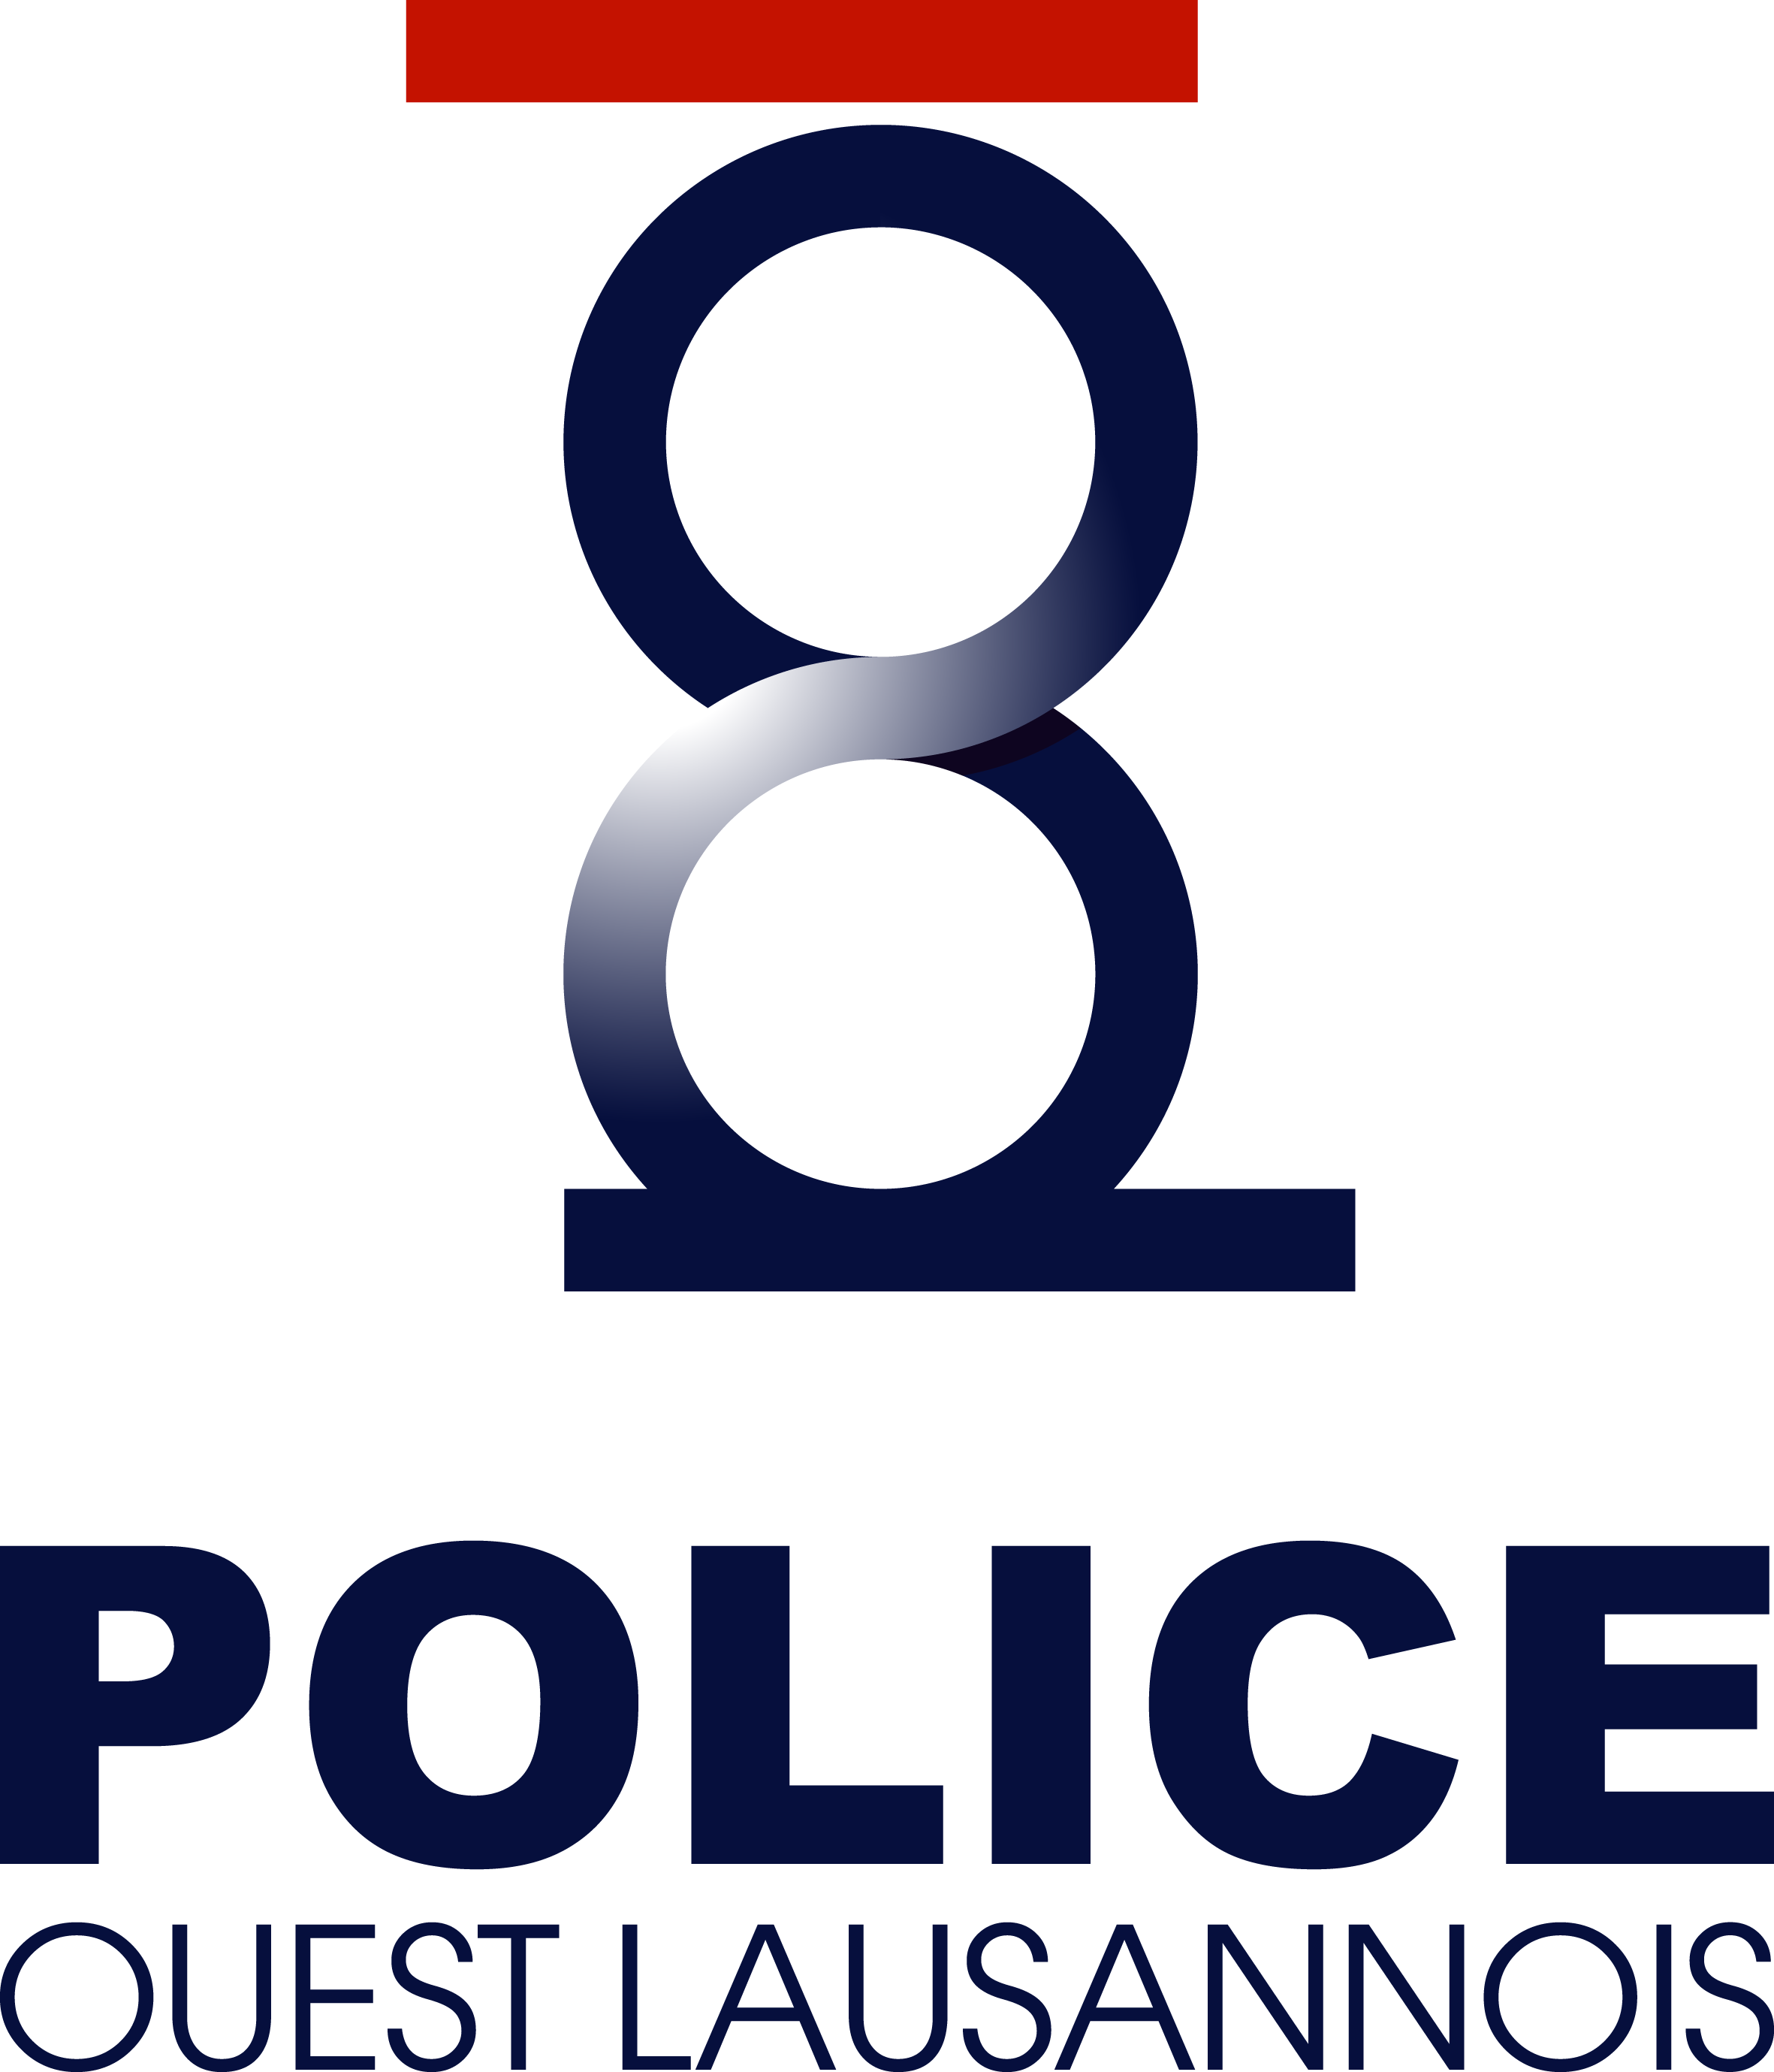 logo-policeouestlausannois.png